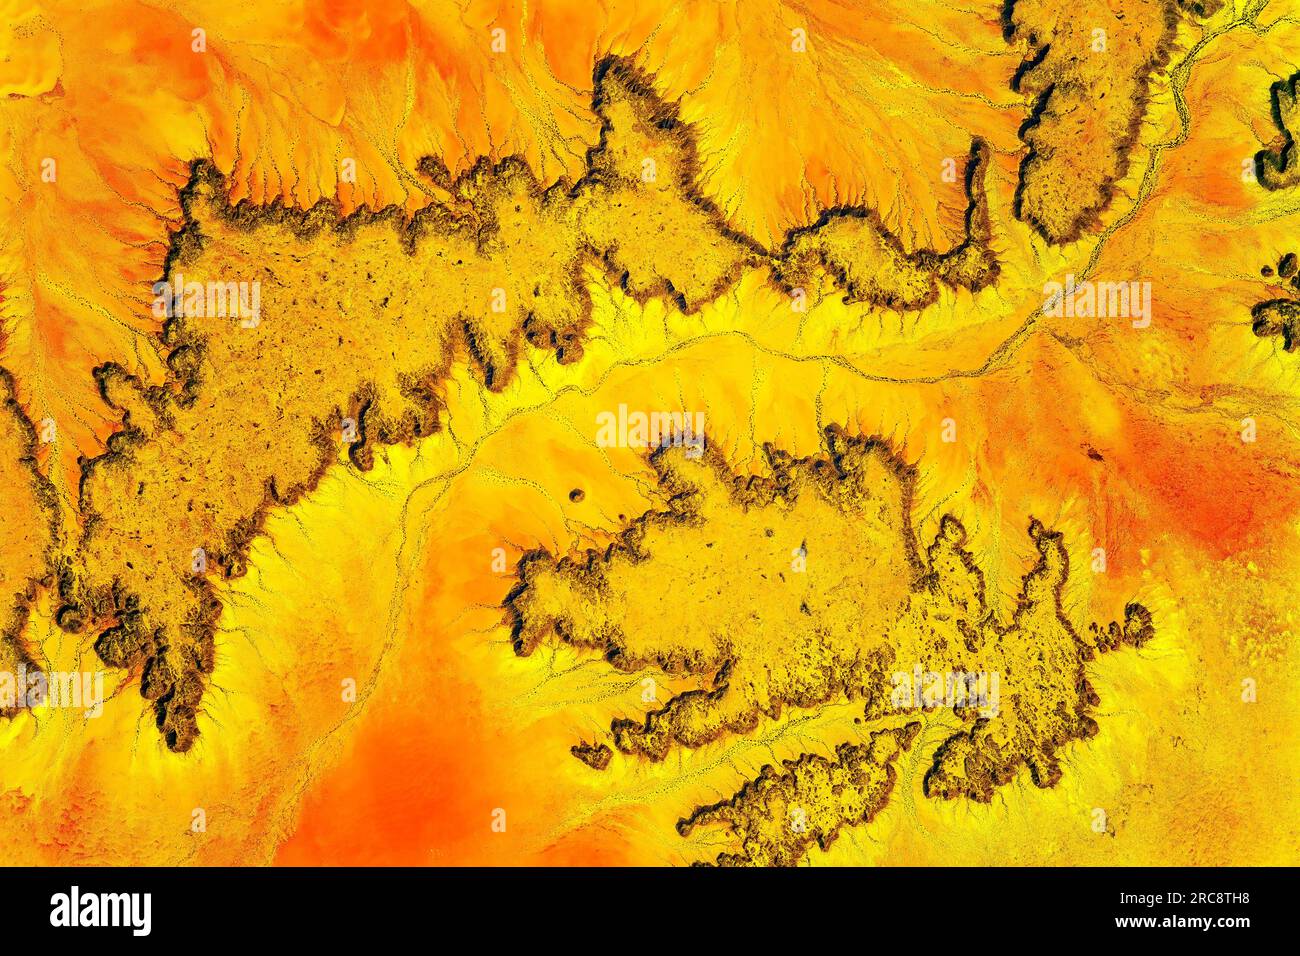 Sahara desert in Sudan. Awesome yellow and orange colors. Image by NASA. Media usage guidelines: https://www.nasa.gov/multimedia/guidelines/index.html Stock Photo